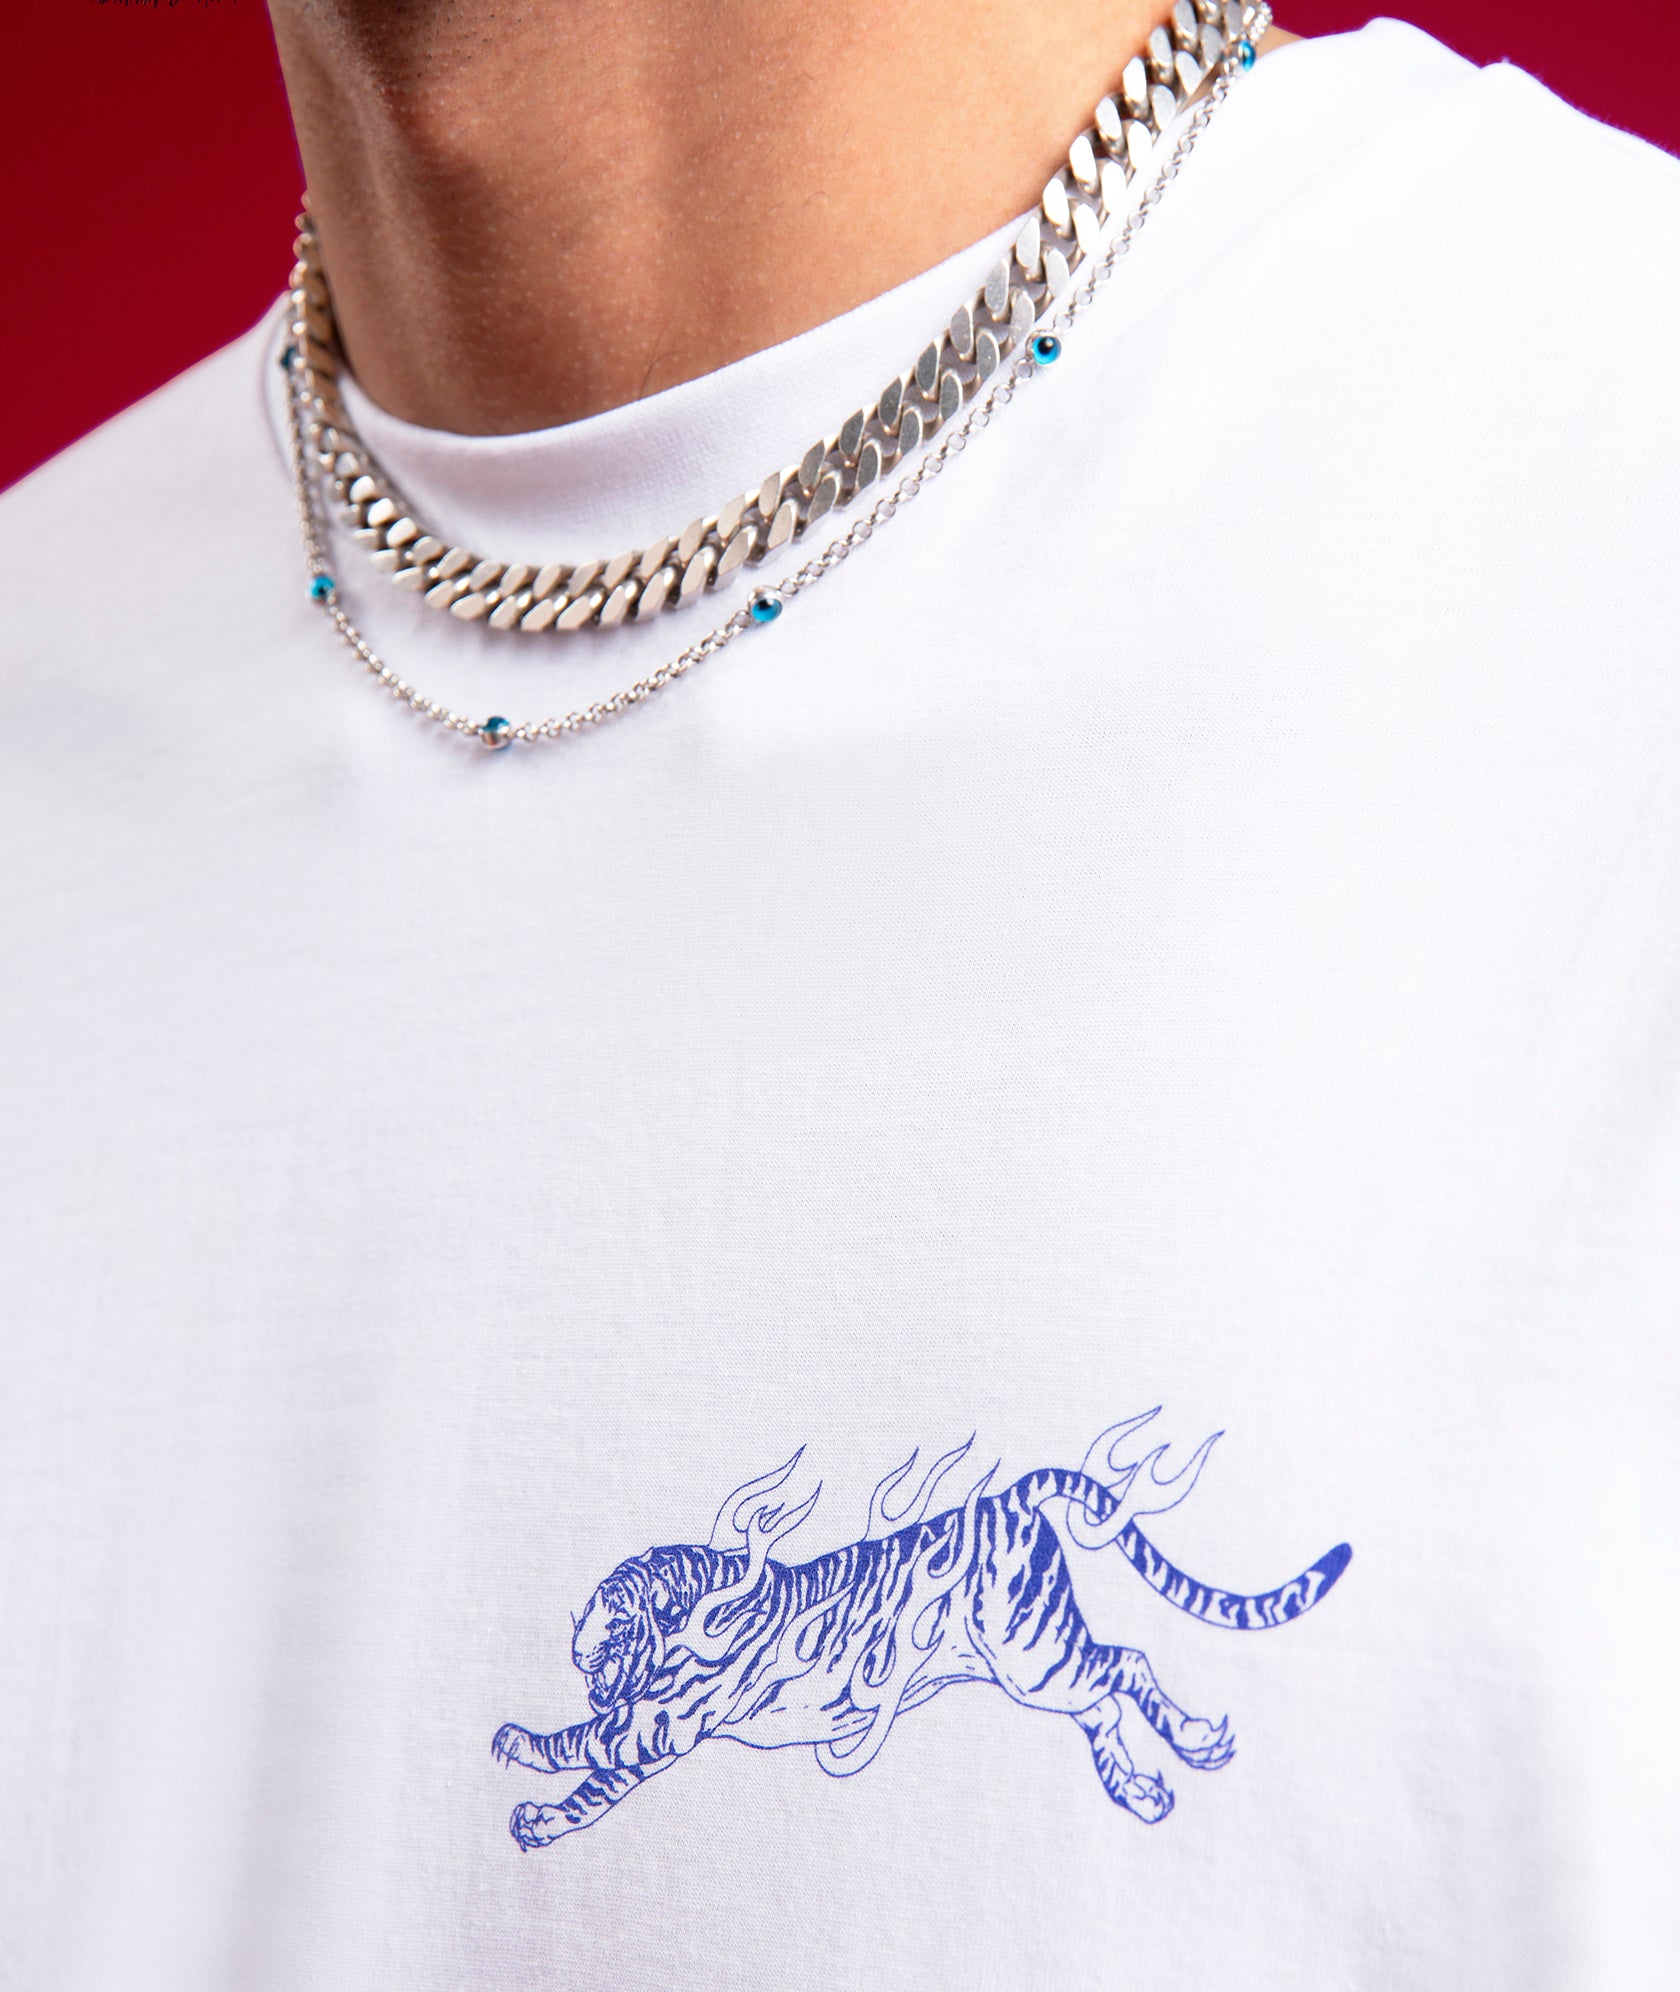 ANIMAUX SAUVAGES TIGER LONGSLEEVE - WHITE